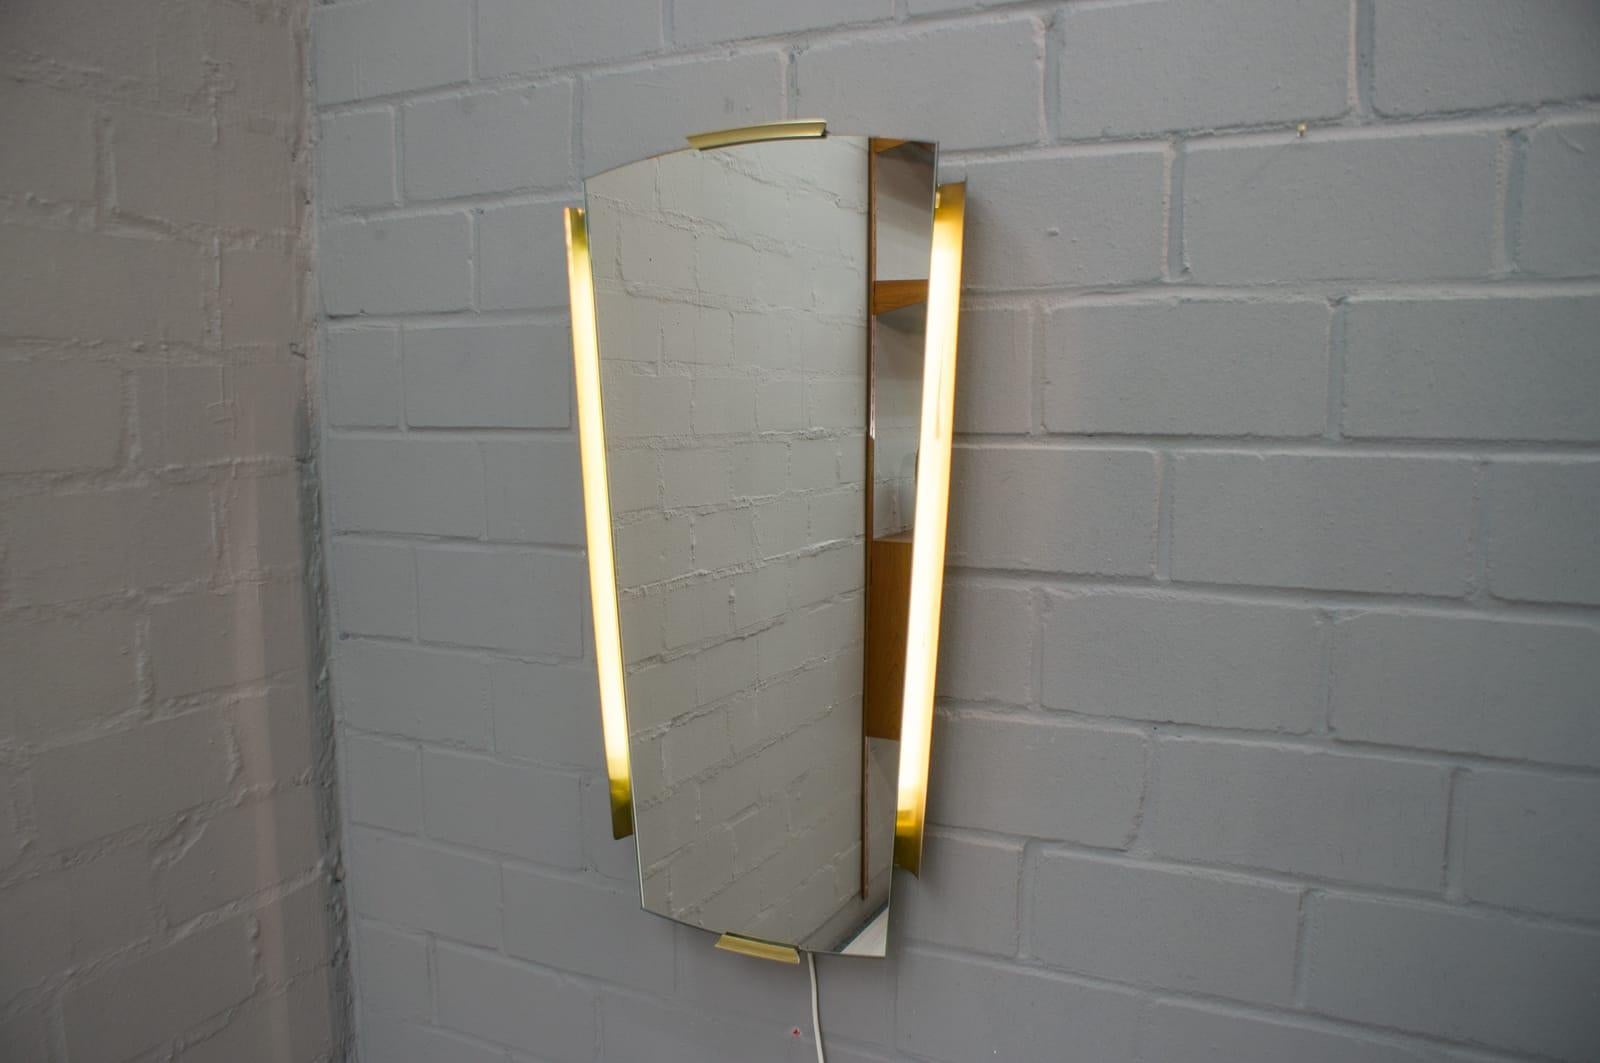 Hollywood Regency Brass Illuminated Wall Mirror by Ernest Igl for Hillebrand, Germany 1950s For Sale